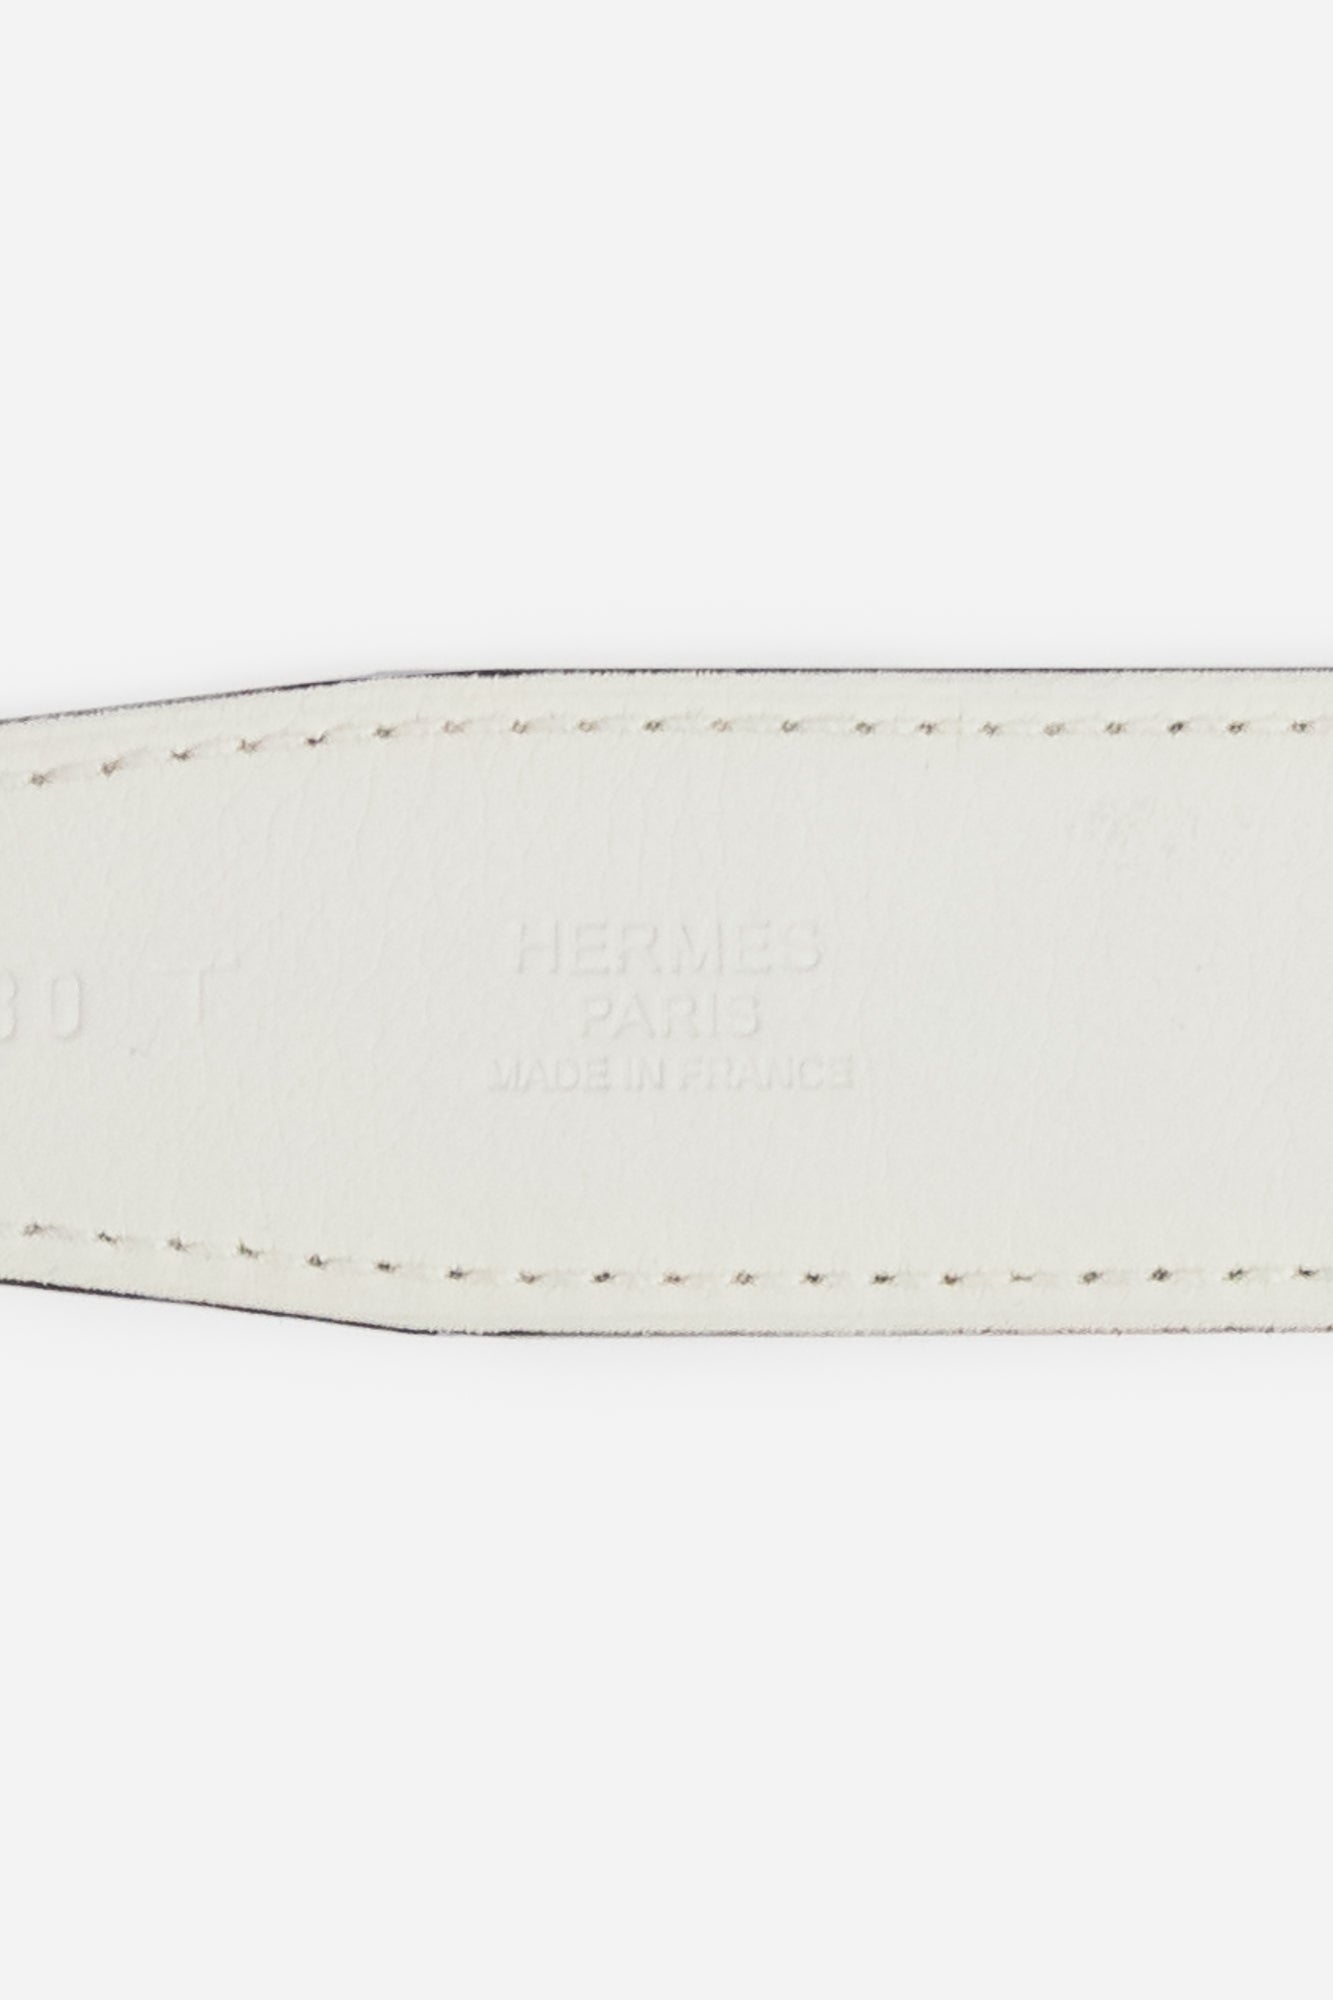 Taupe Leather H Belt Strap